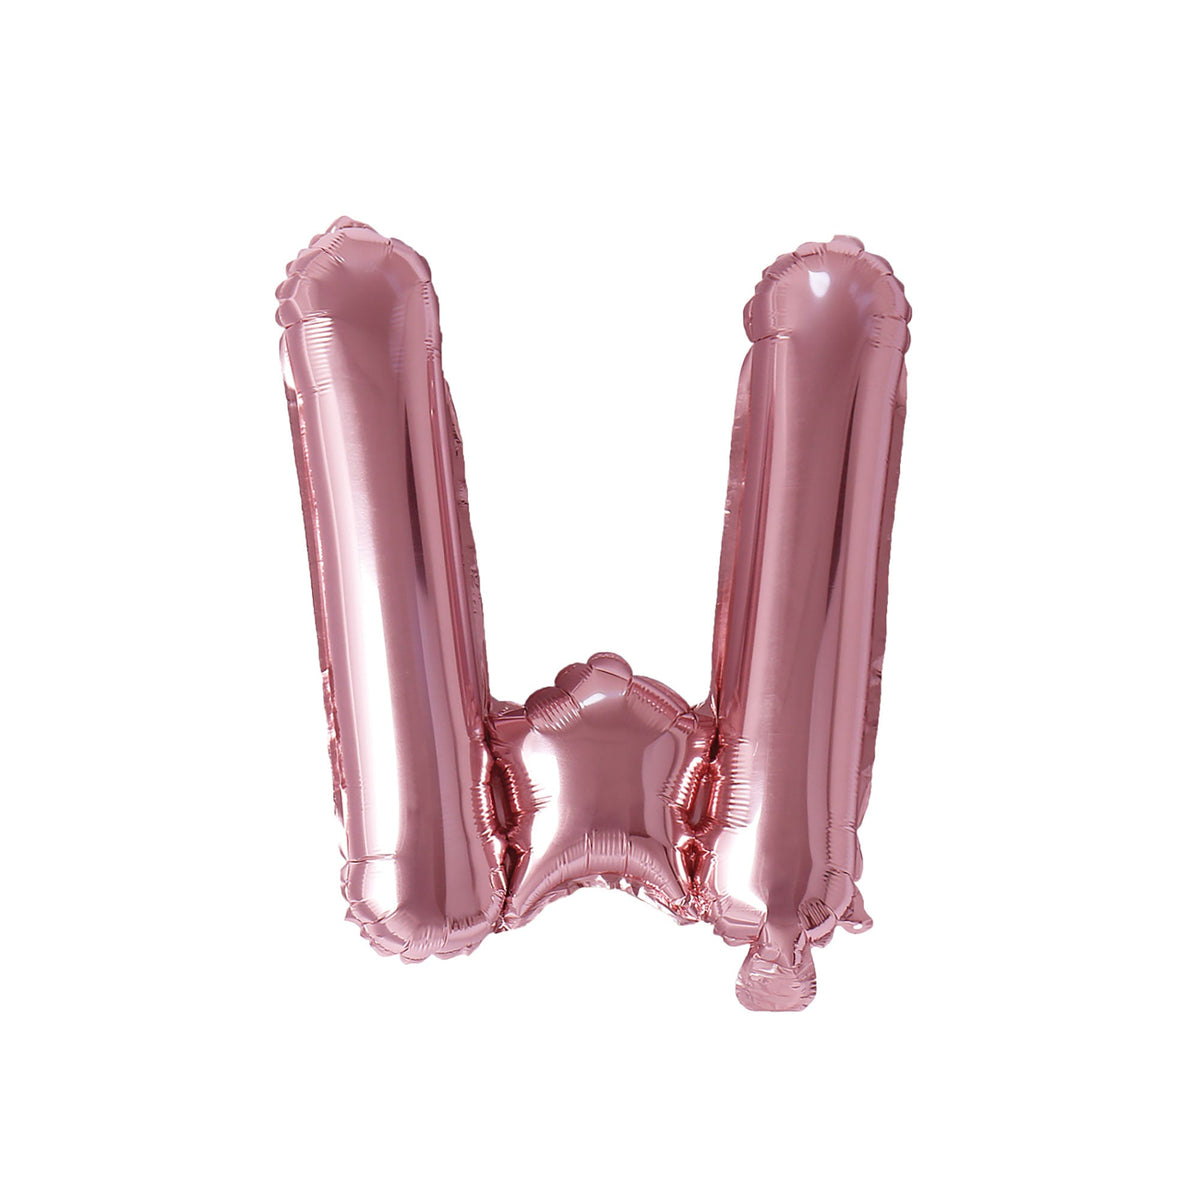 PARTY EXPERT Balloons Rose Gold Letter W Foil Balloon, 16 Inches, 1 Count 810064194412